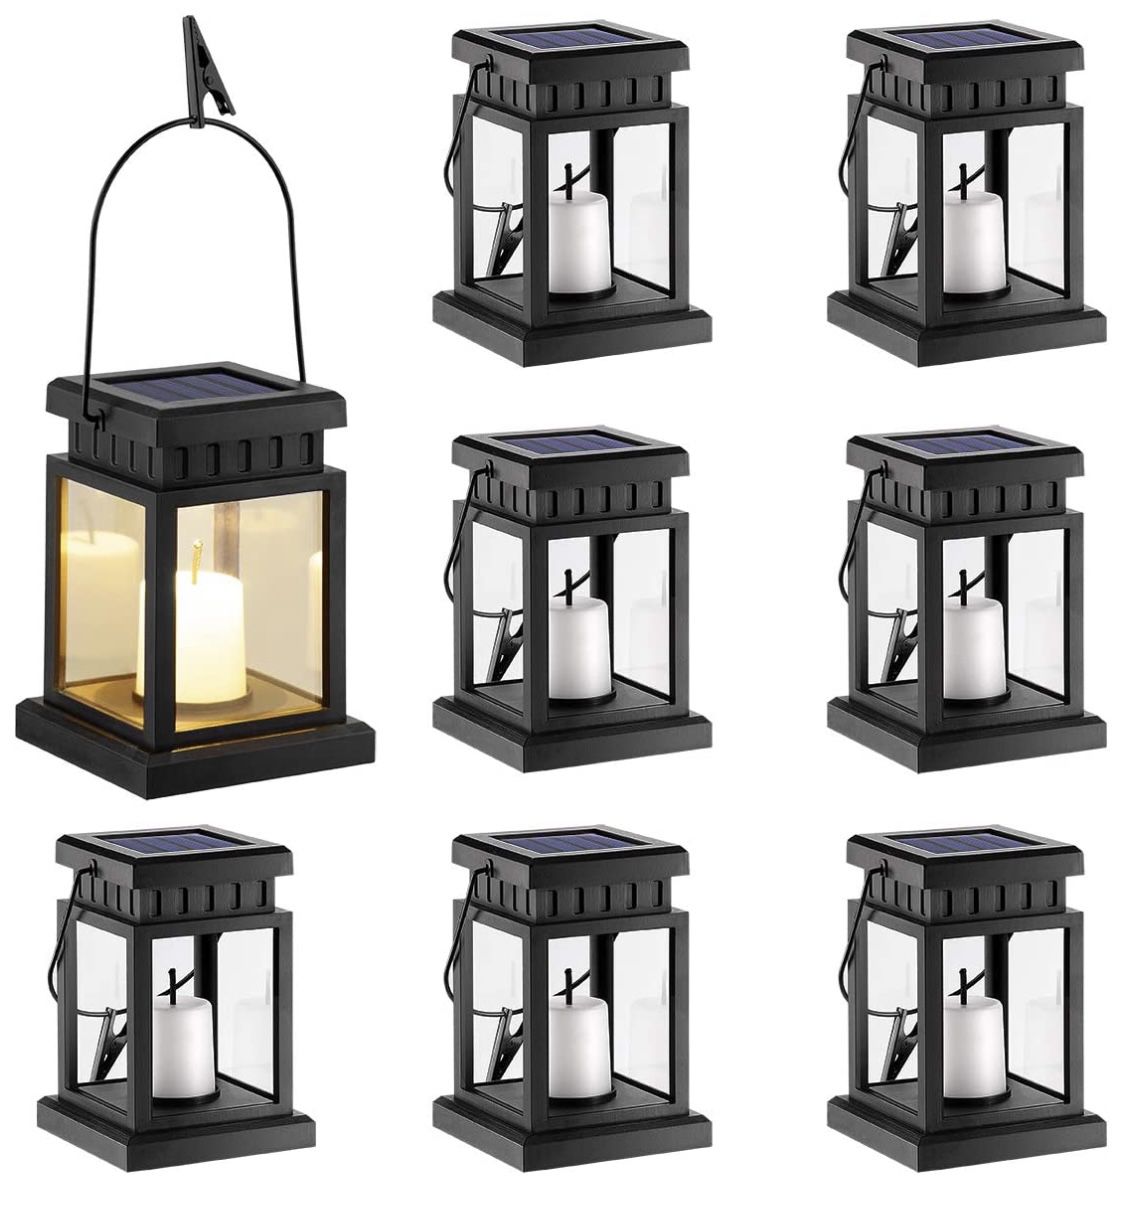 GIGALUMI 8 Pack Solar Hanging Lantern Outdoor, Candle Effect Light with Stake for Garden,Patio , Lawn, Deck , Umbrella, Tent, Tree,Yard,Driveway-Warm